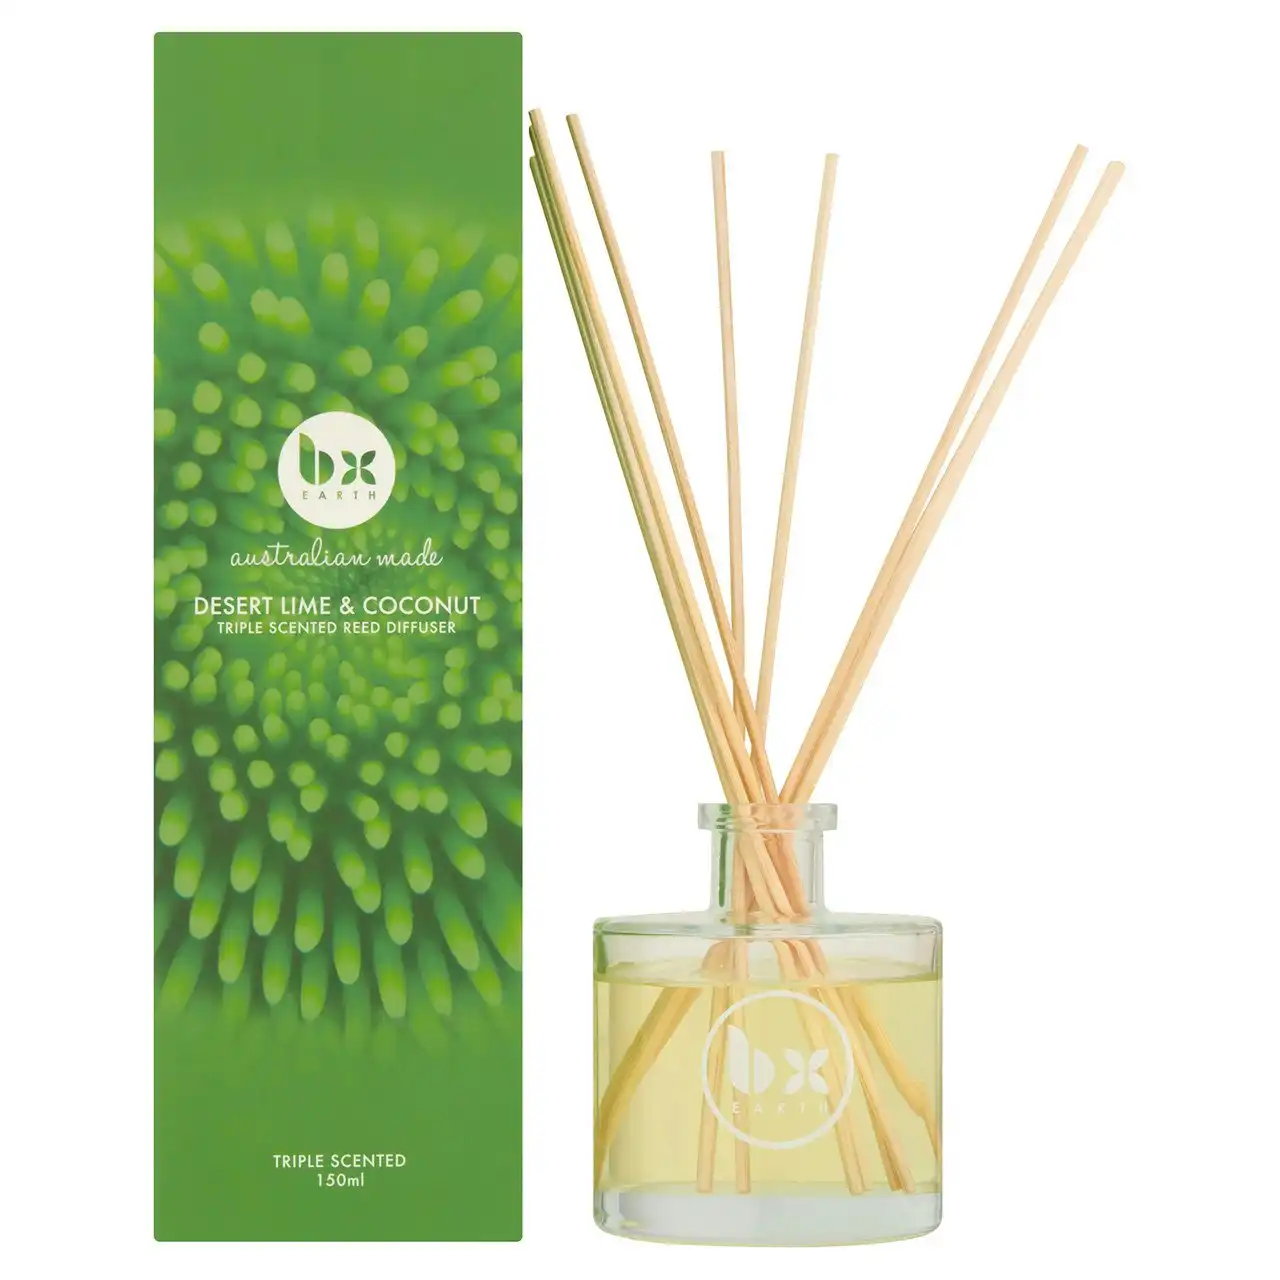 BX Earth Desert Lime & Coconut Triple Scented Reed Diffuser 150ml